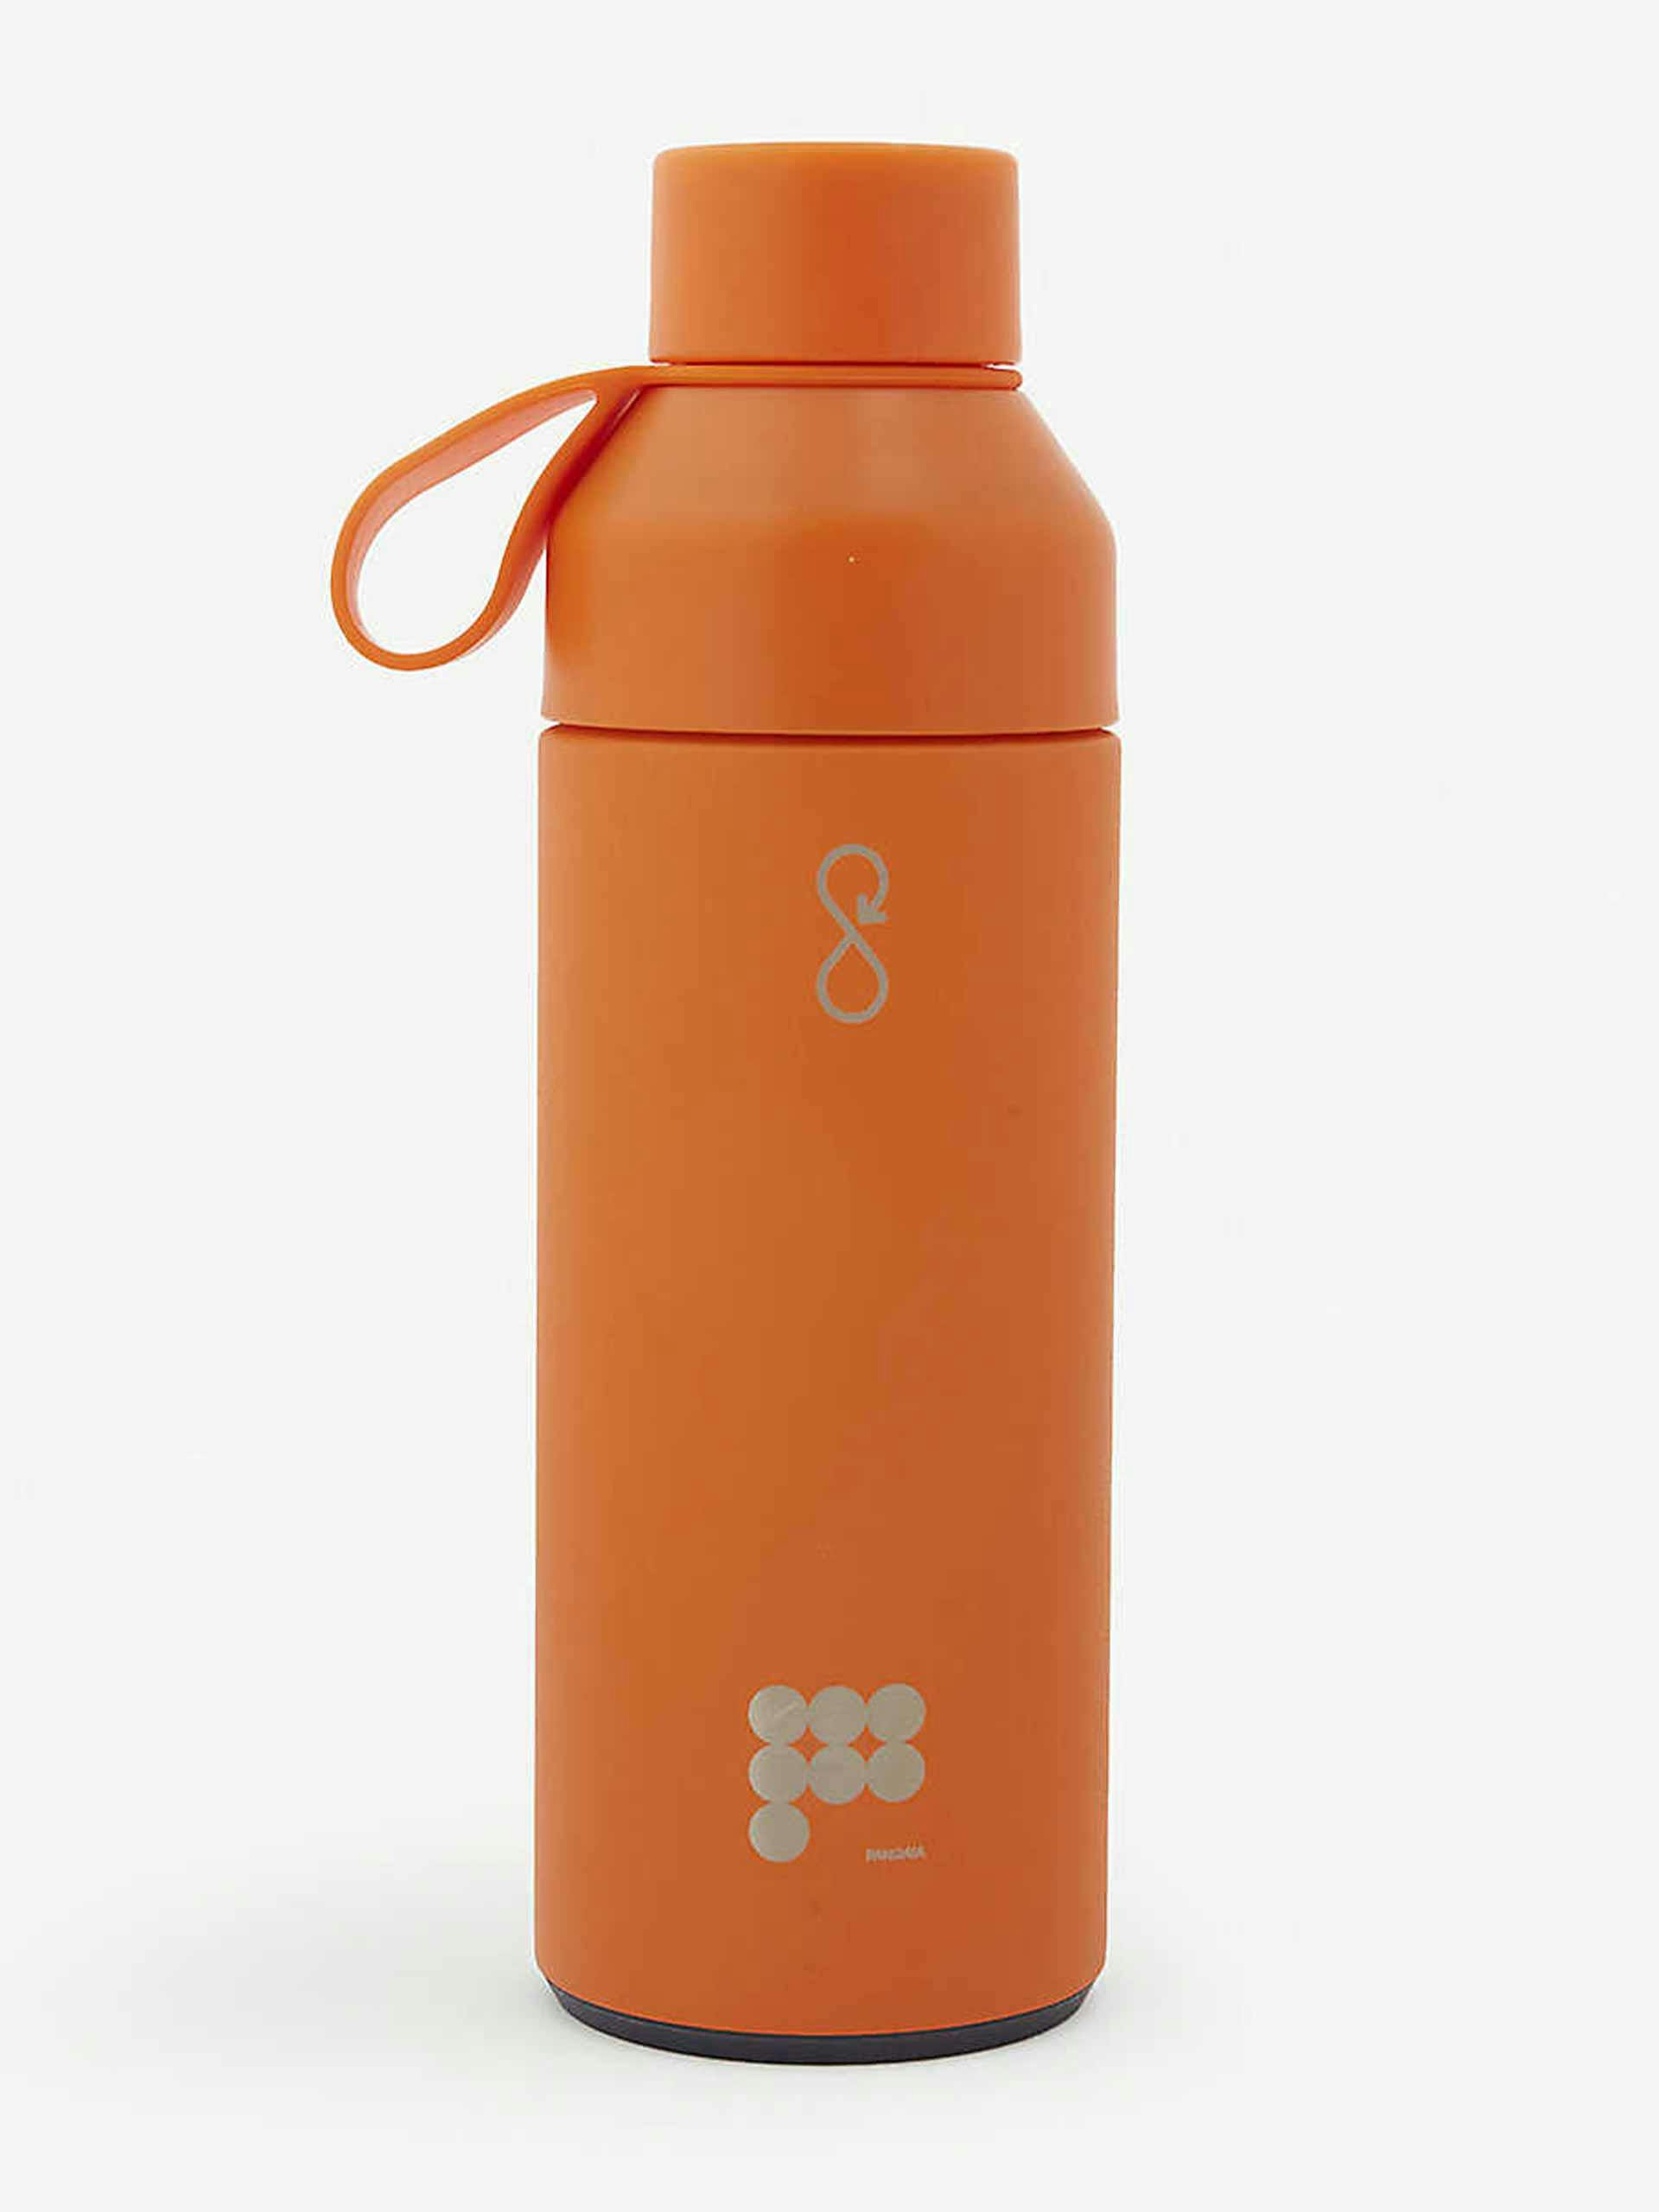 Recycled stainless steel bottle